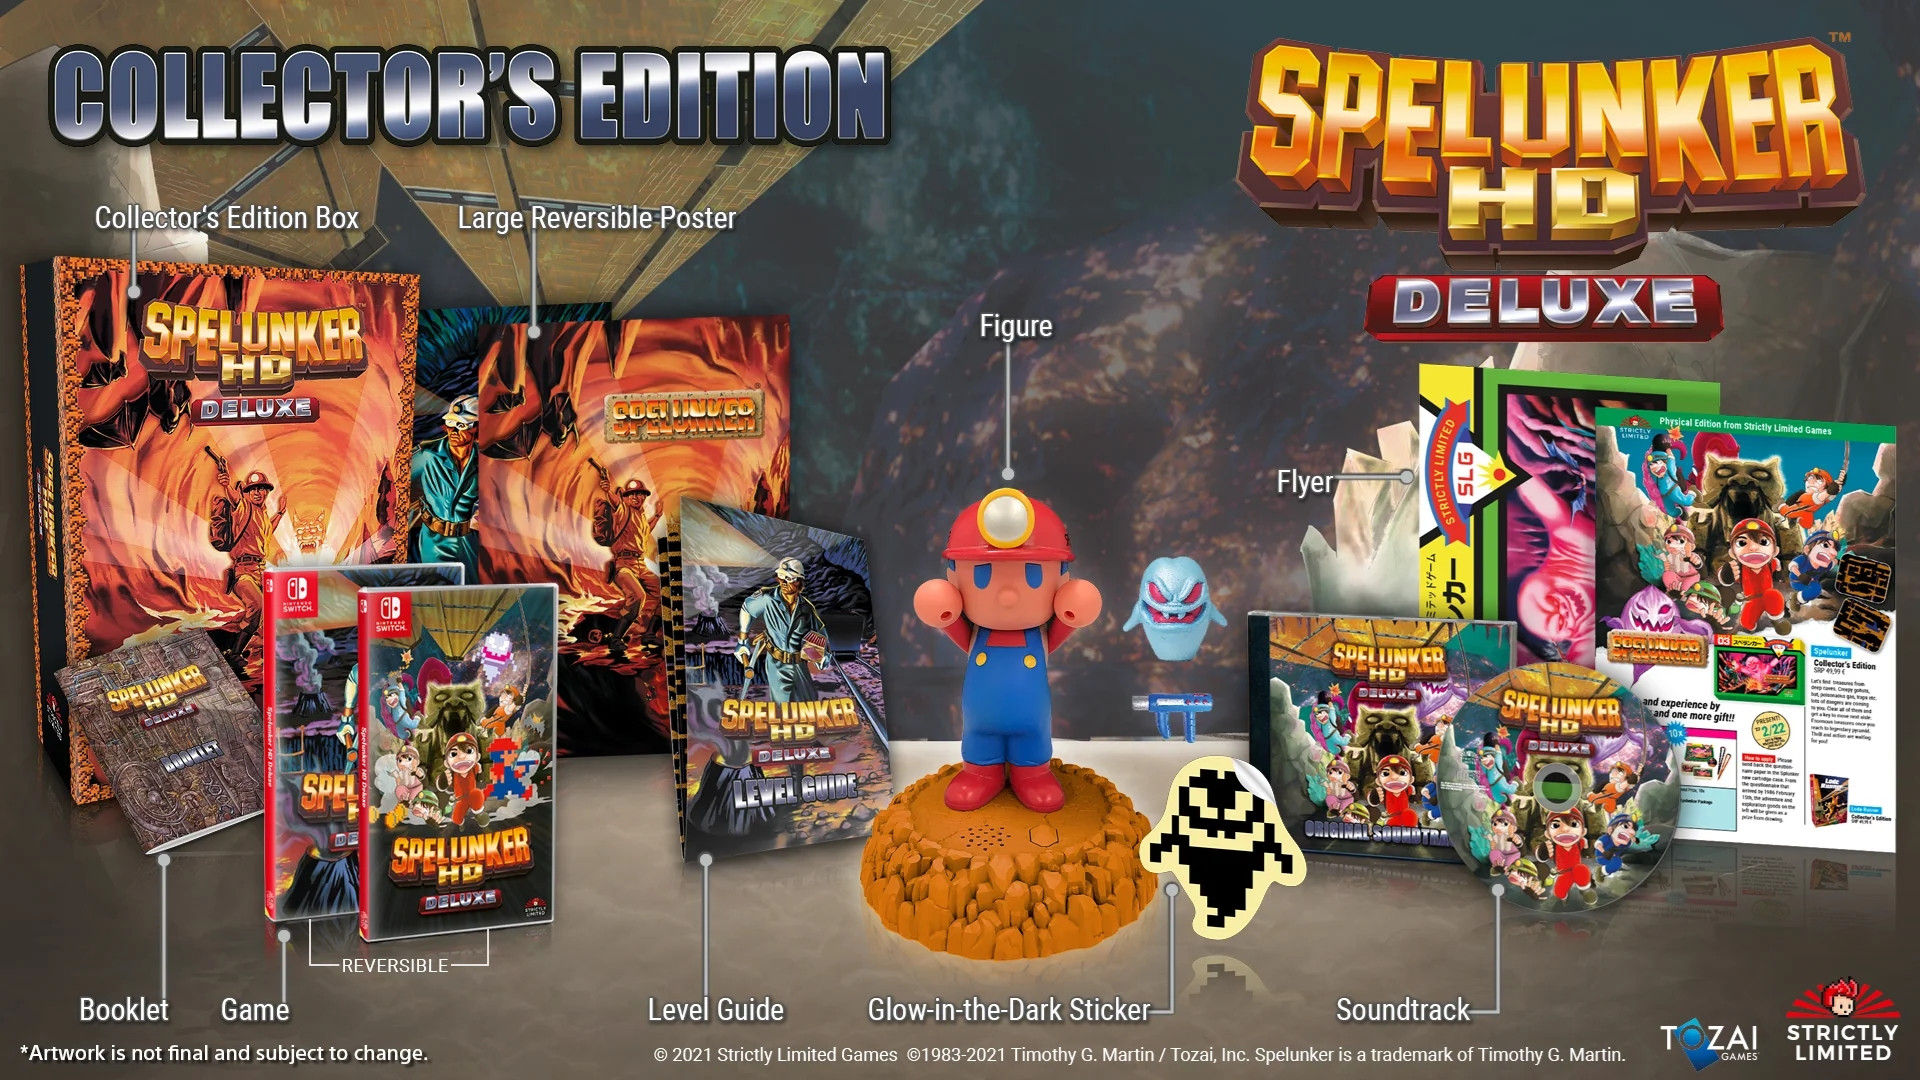 Spelunker HD Deluxe - Collector's Edition (Strictly Limited) (Switch), Tozai Games